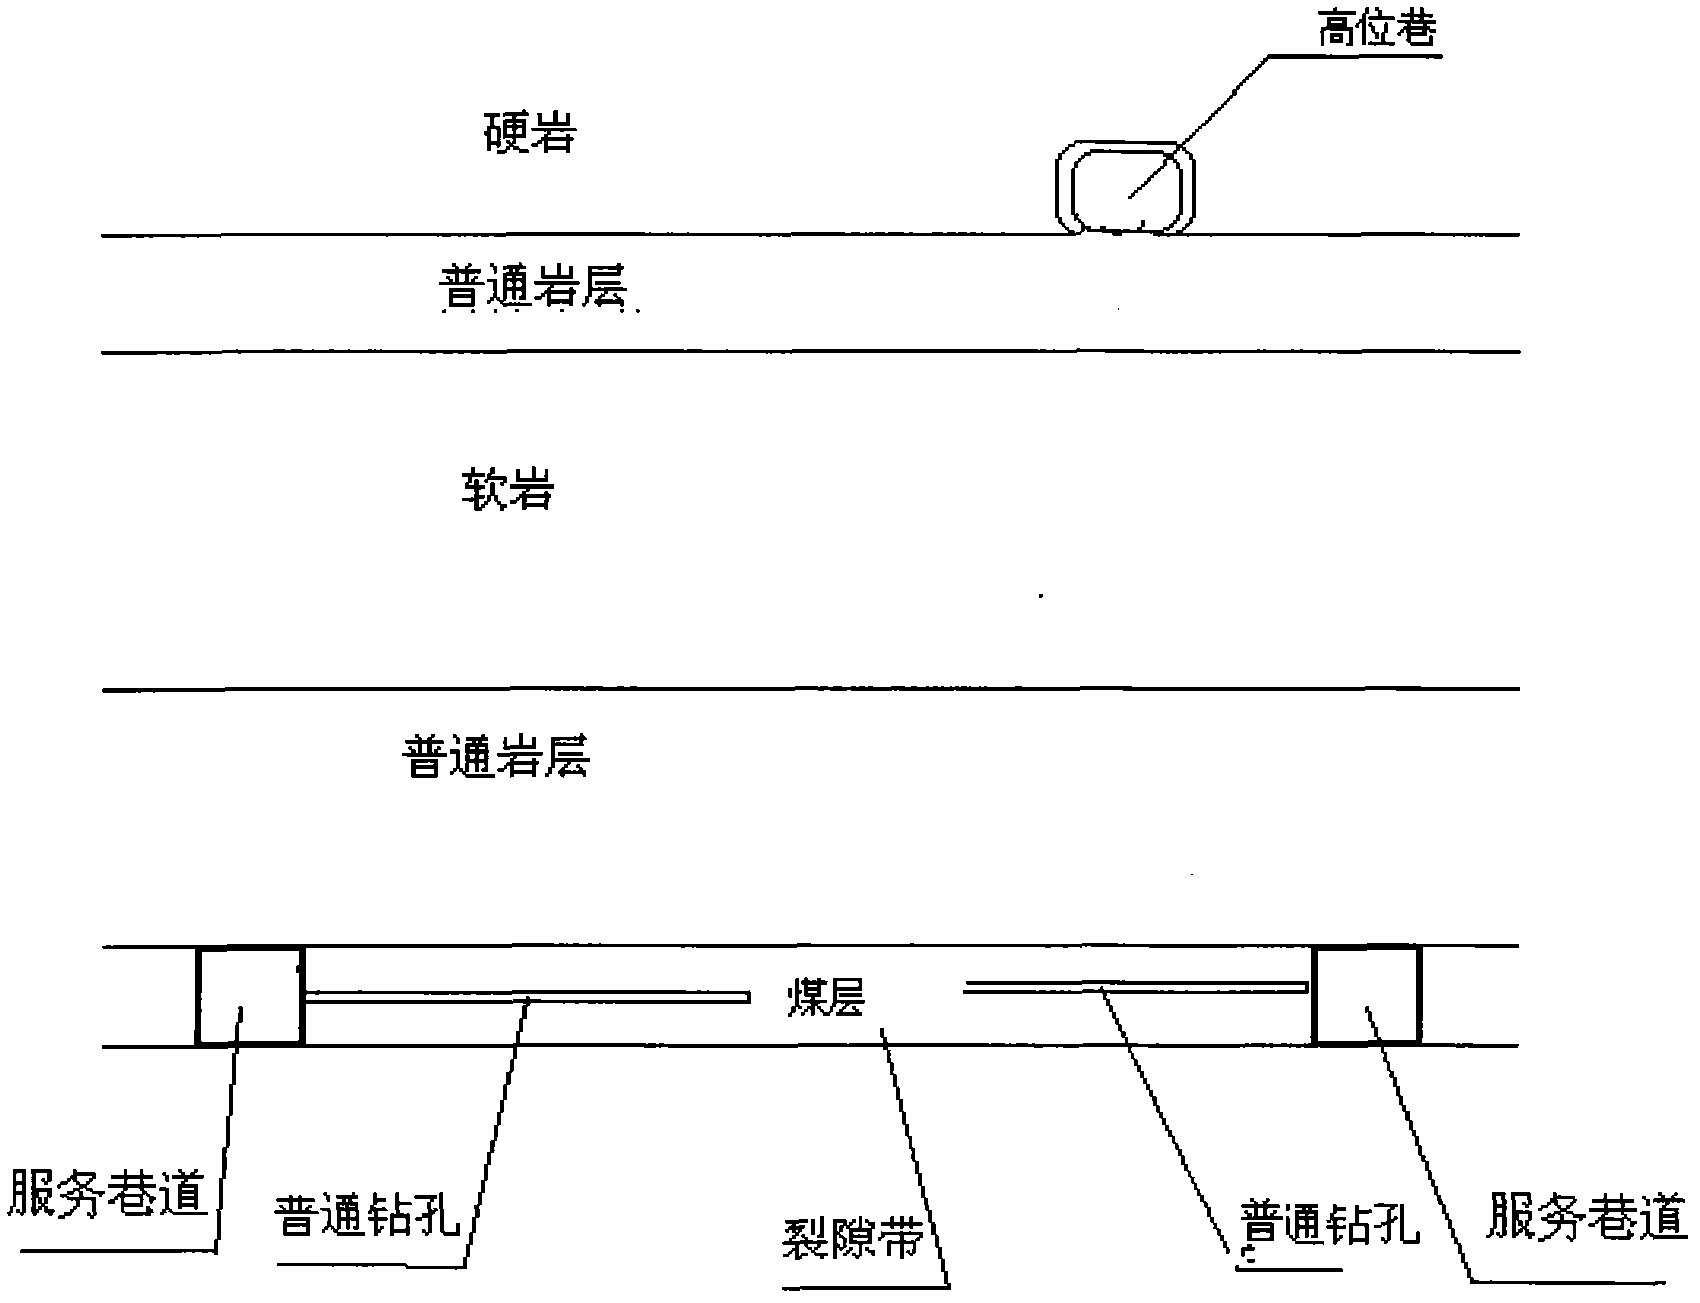 Method for gas drainage from high-position roadway coal seam containing shielded soft rock